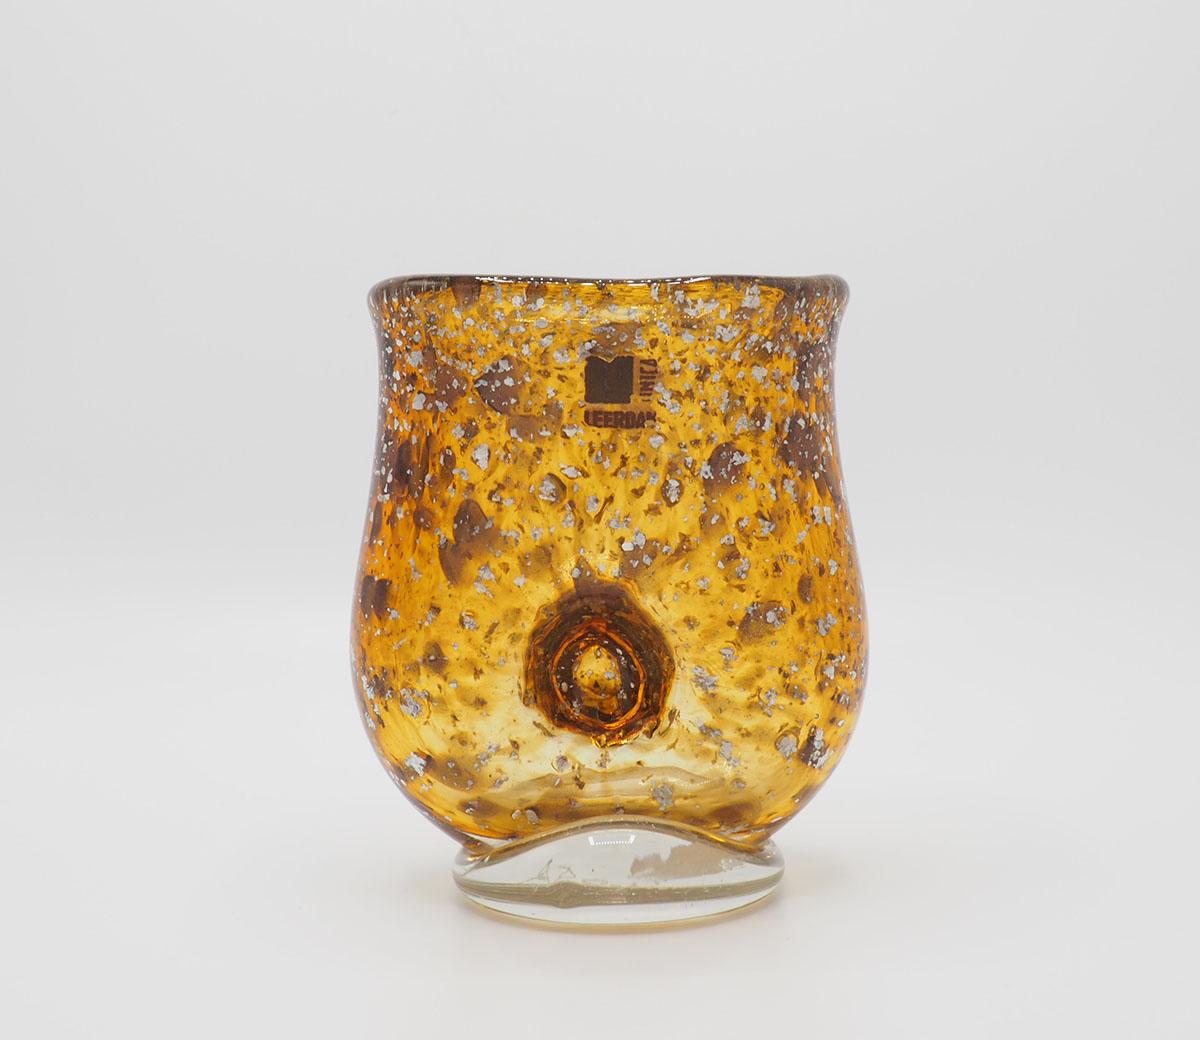 A Unica glass vase by the Dutch glass artist A.D. Copier for glasfabriek Leerdam
Unica M serie 167 made in 1931-1932.
A.D, Copeir is the biggest glass artist the Netherlands has had and lived from 1901 to 1991.
This hand-blown vase is a unique one,